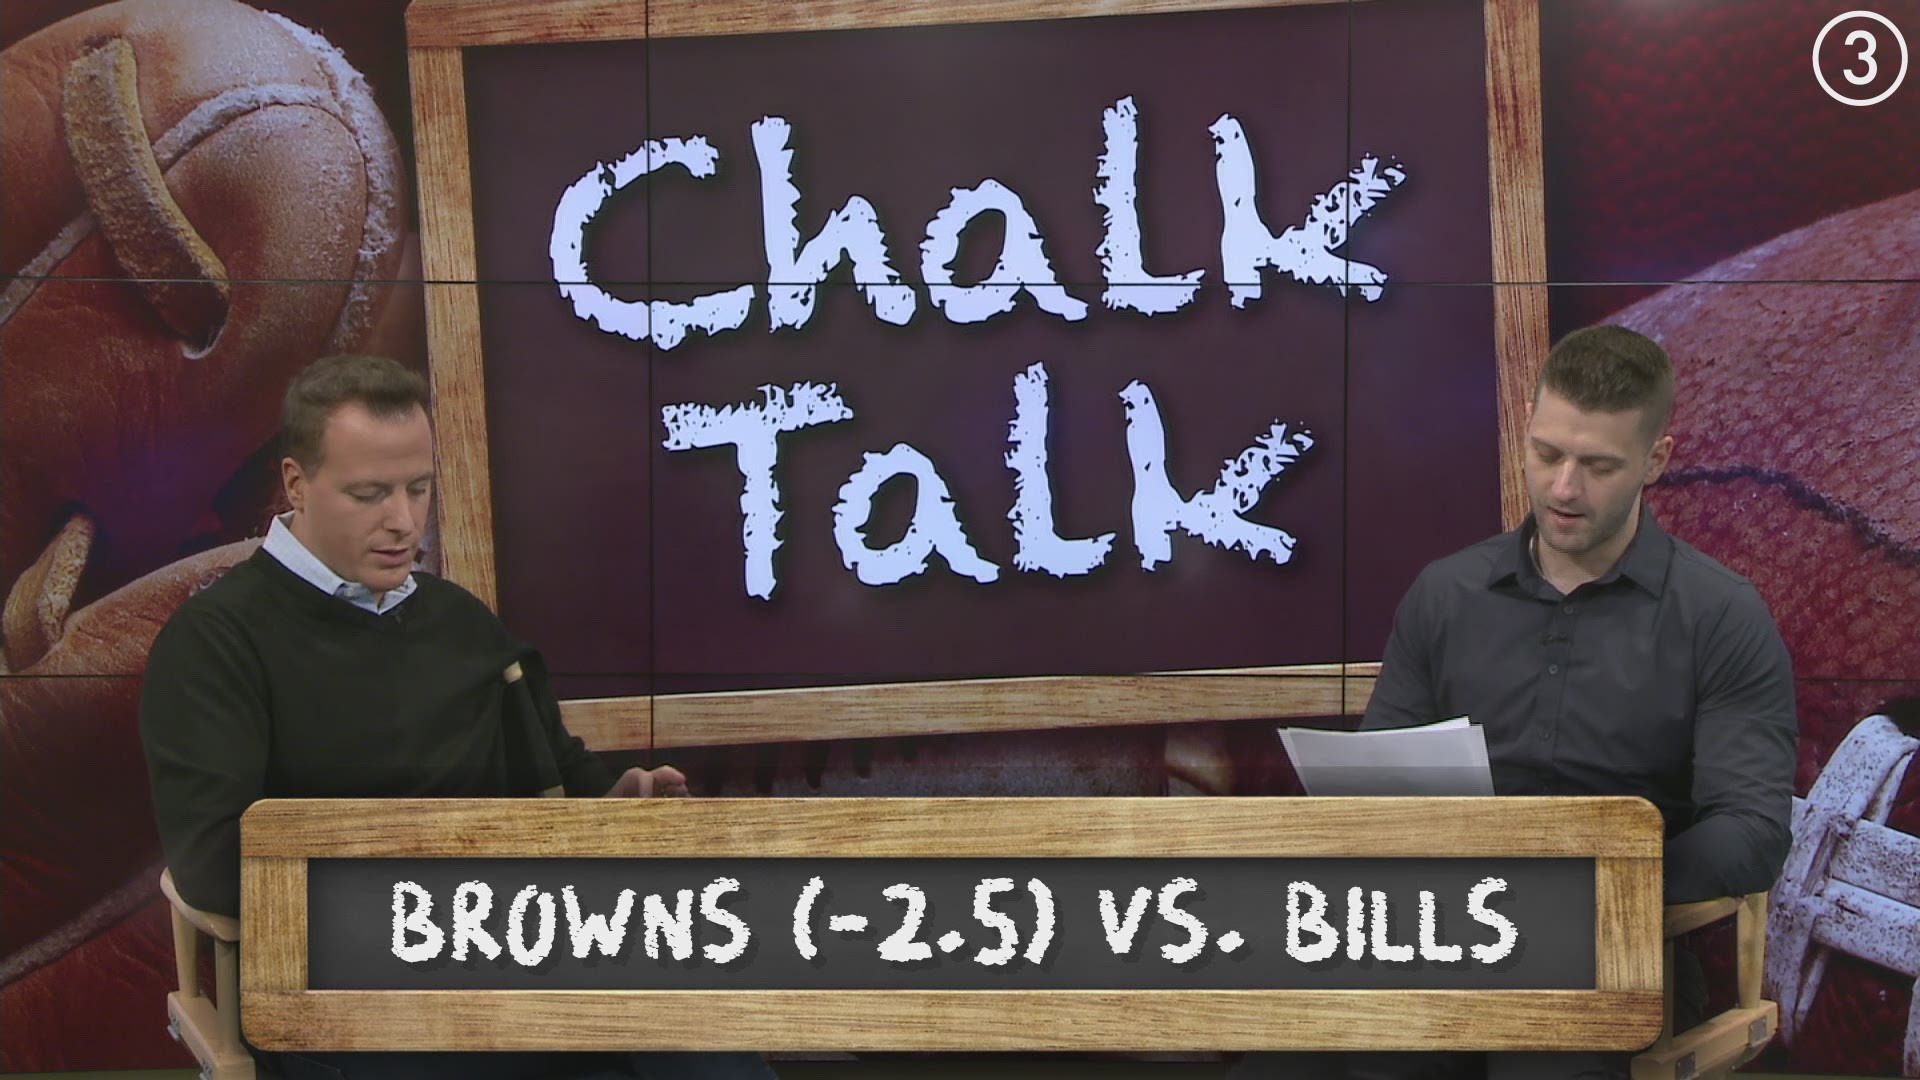 Sneak peek of the latest episode of Chalk Talk!  Nick Camino and Ben Axelrod discuss the Browns vs. Bills game this Sunday at FirstEnergy Stadium.